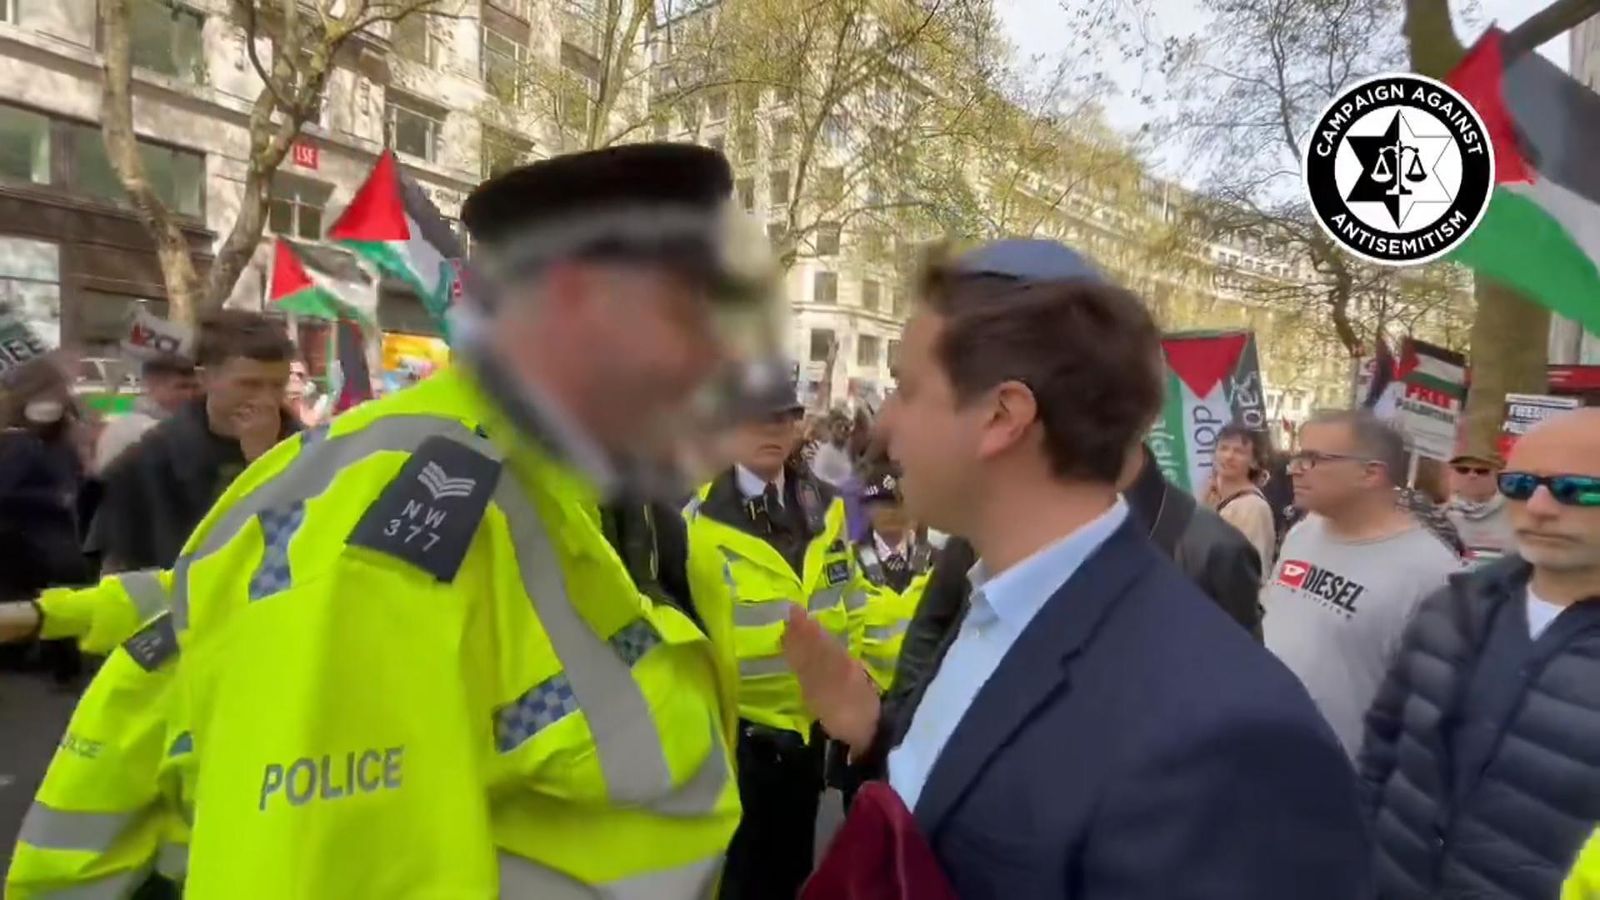 met police apologises for using phrase 'openly jewish' as campaigner accuses force of 'victim-blaming'